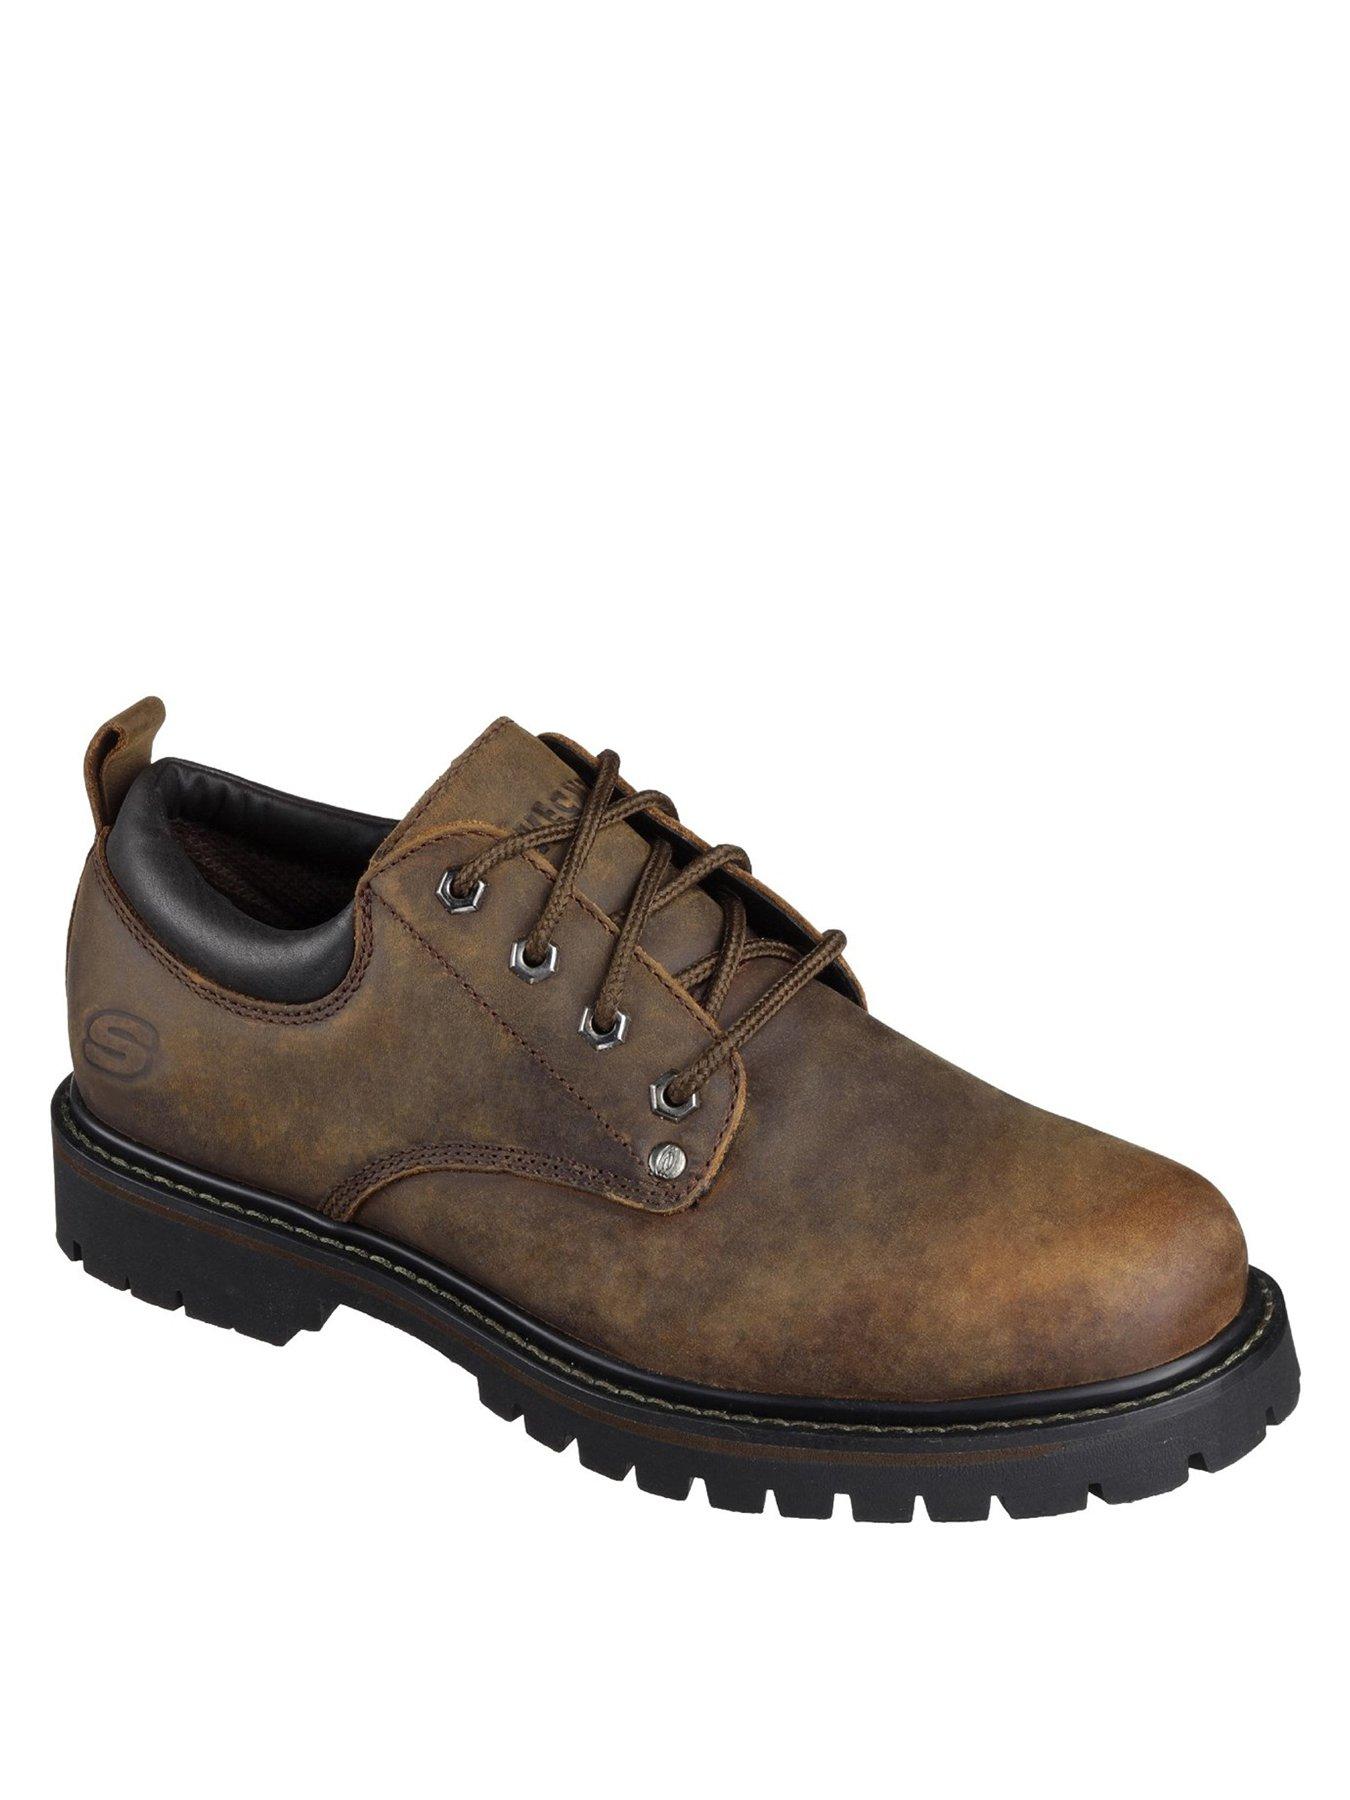 Skechers Tom Cats Utility Leather Shoes |